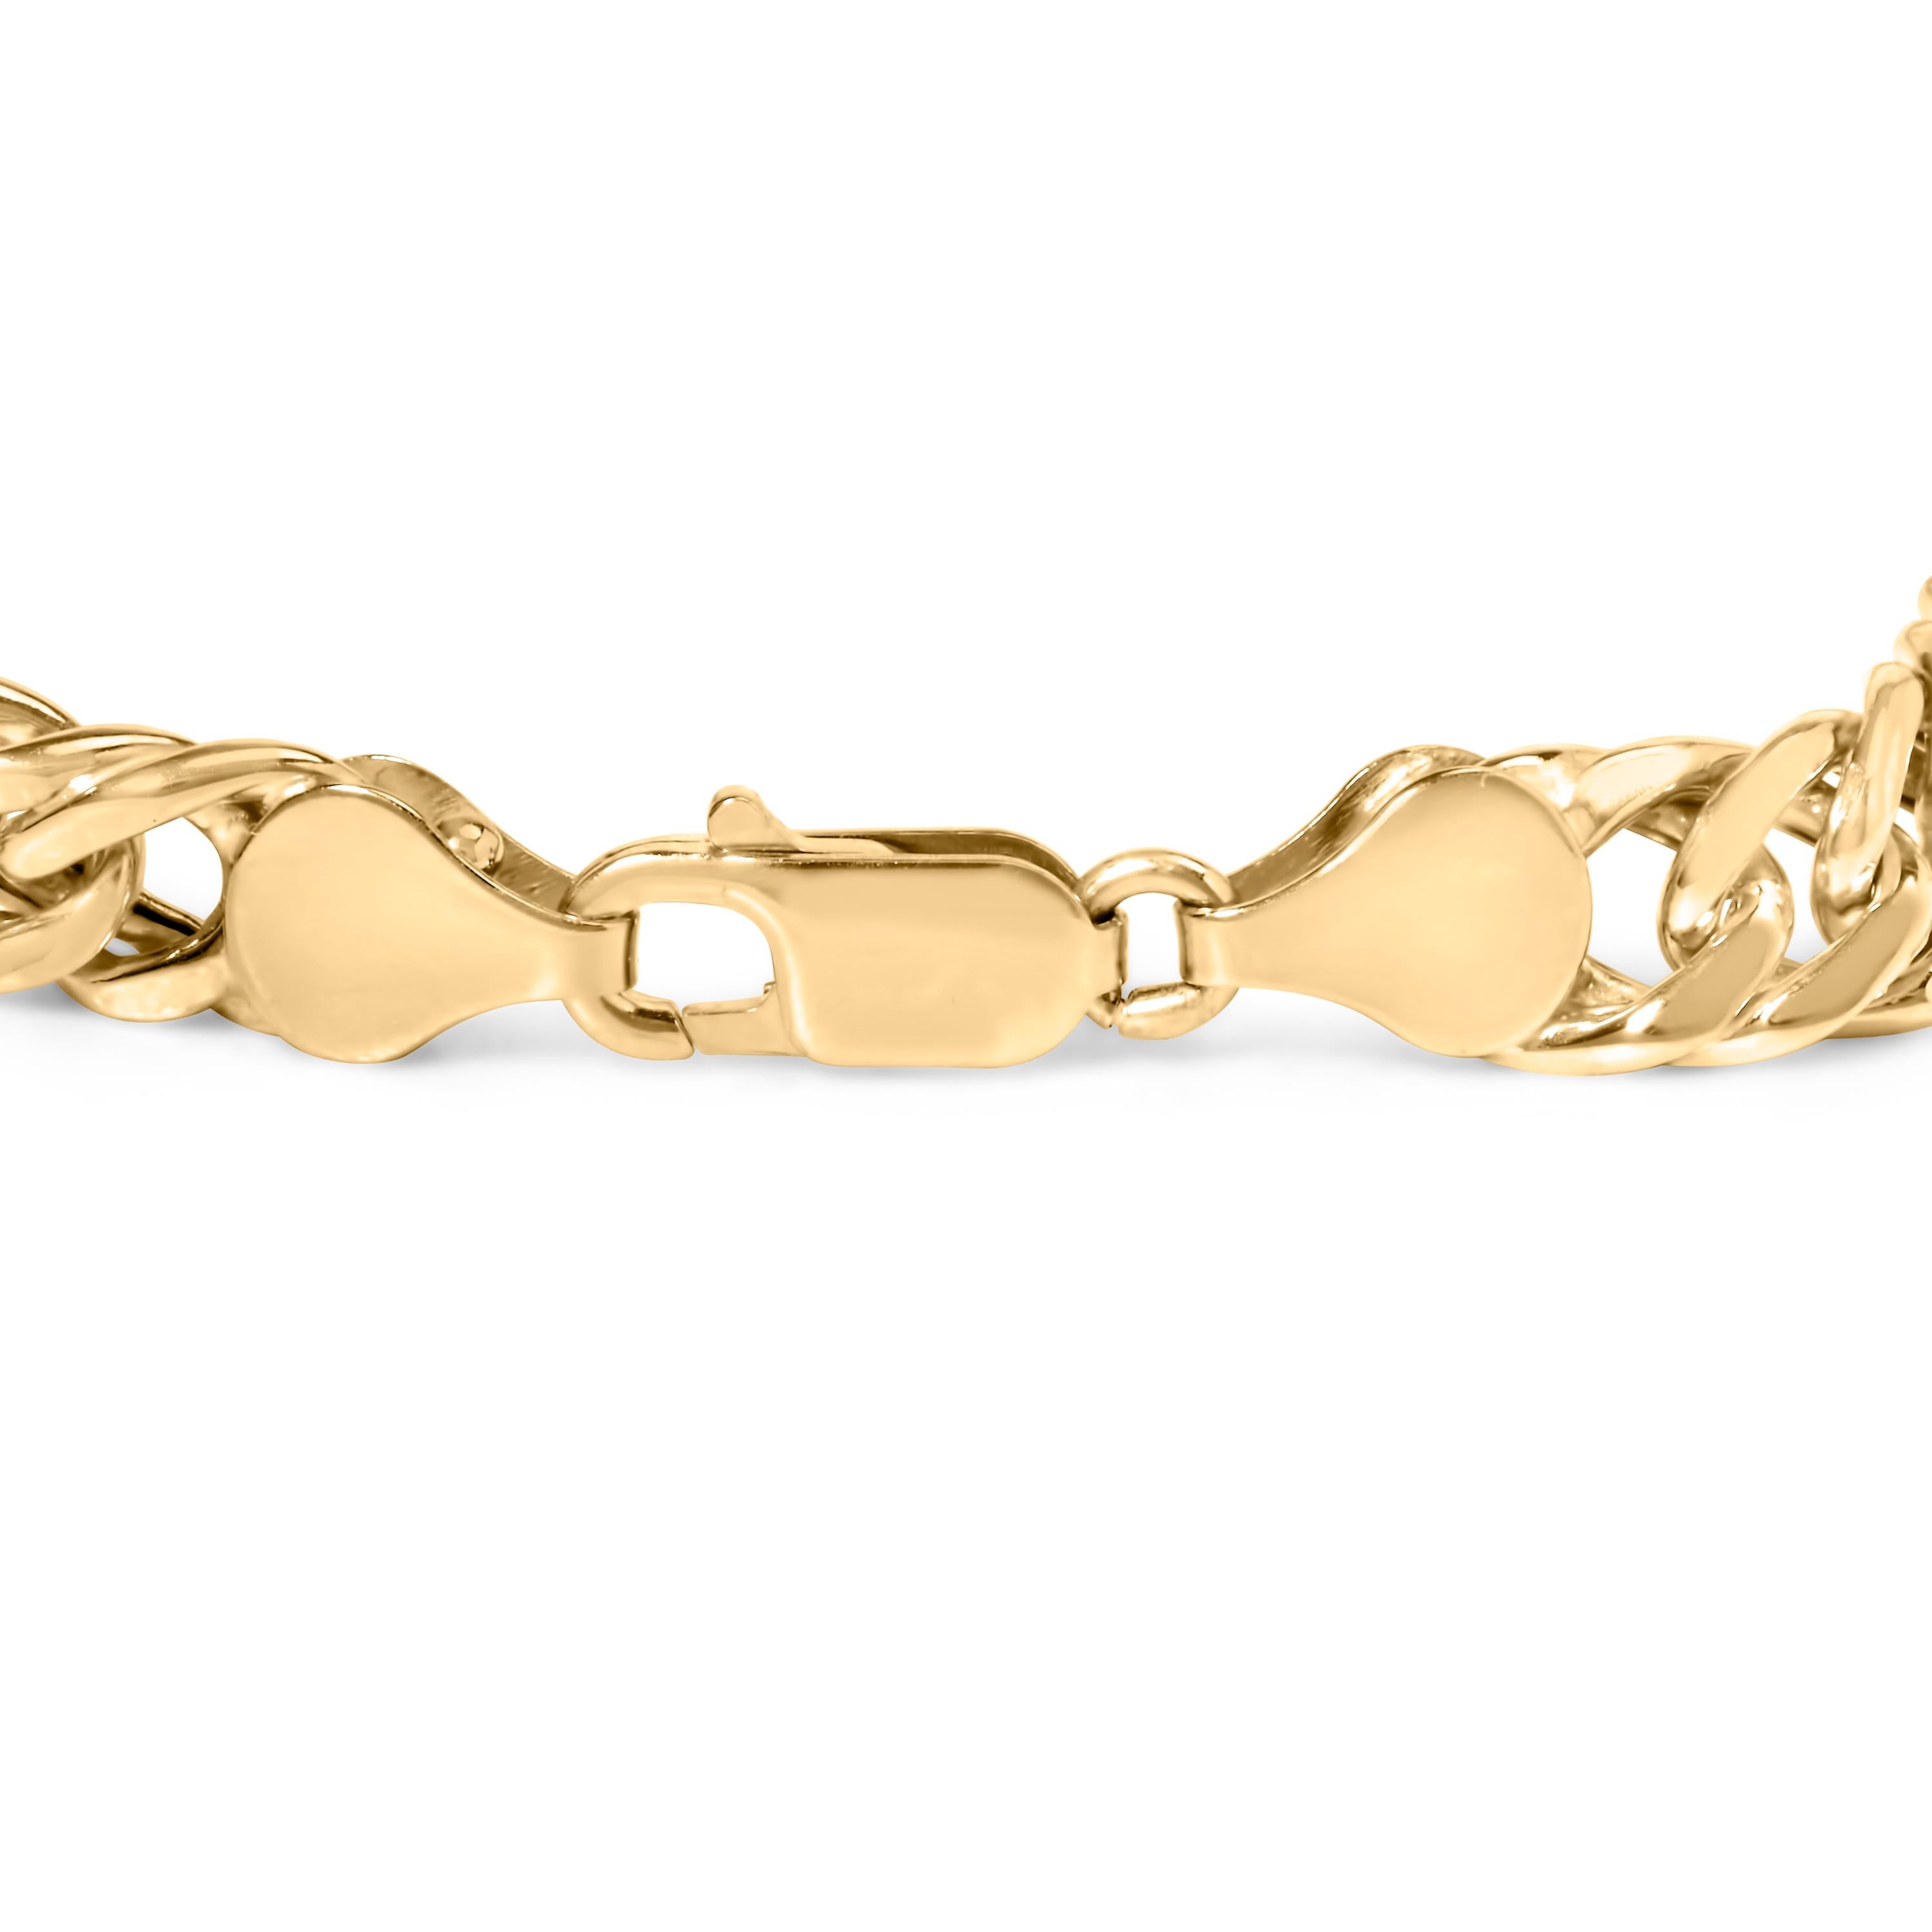 Indulge in luxury with our exquisite 10K Yellow Gold Cuban Link Bracelet, a timeless piece that exudes elegance and sophistication. Crafted from gleaming 10K yellow gold, this bracelet is a statement of refined style and impeccable craftsmanship.